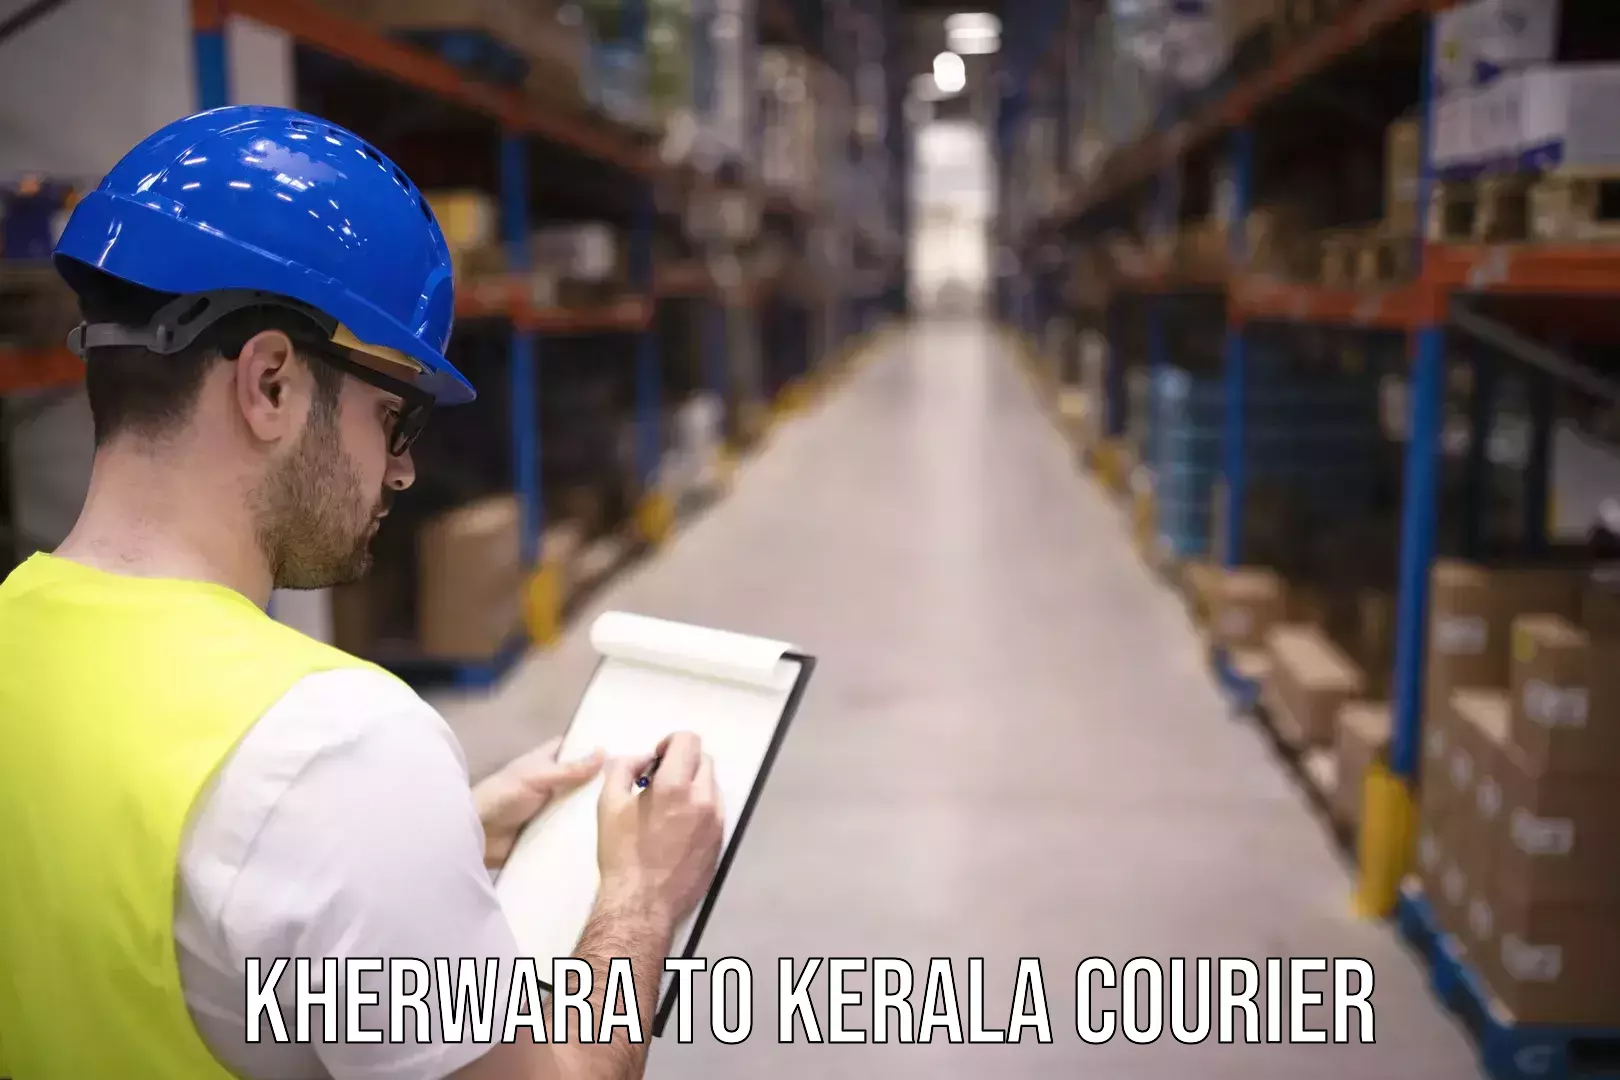 Next-day delivery options Kherwara to Cochin University of Science and Technology